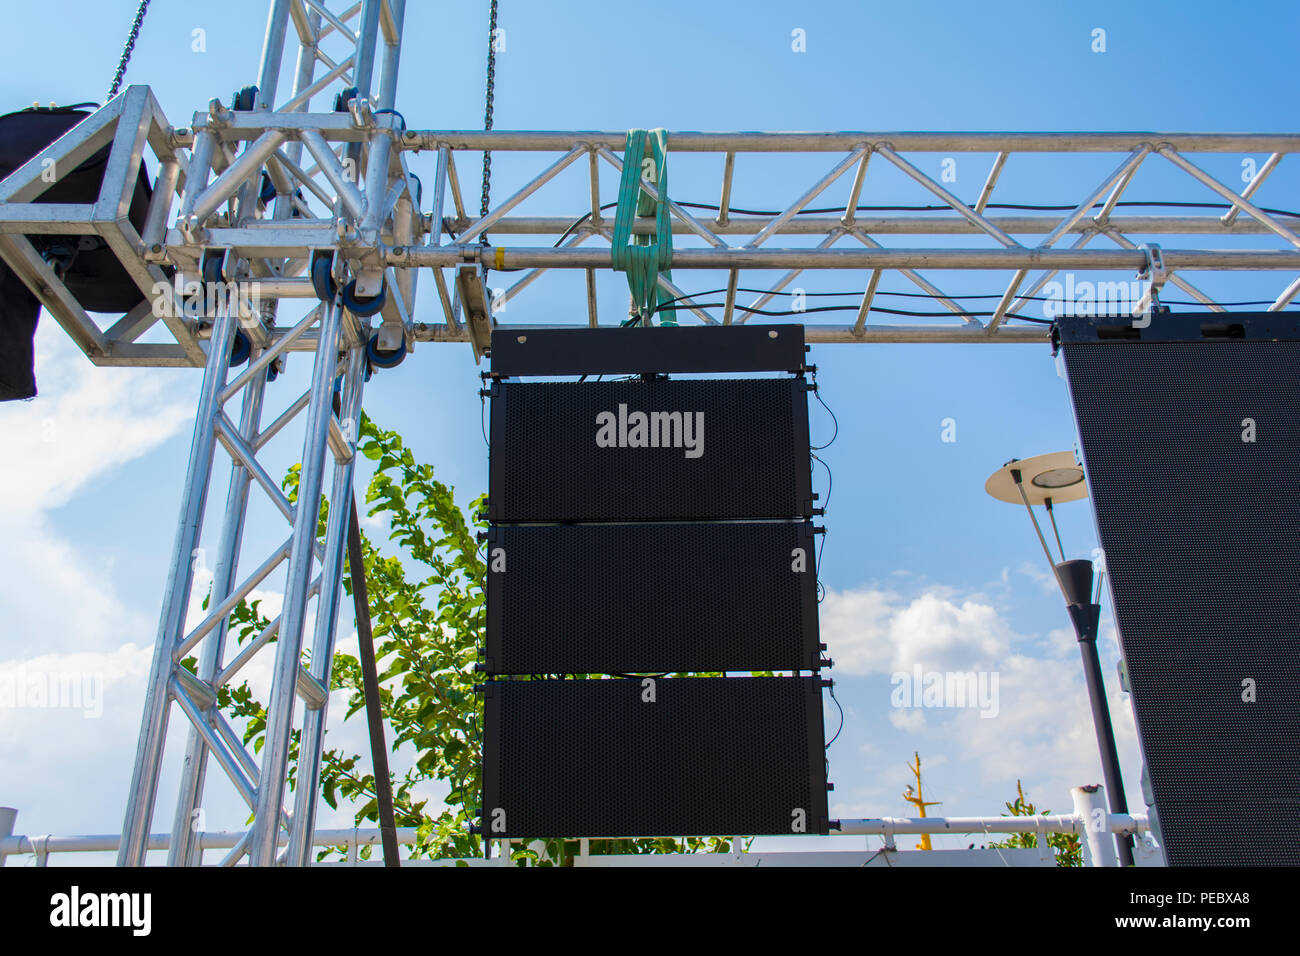 Setting of stage sound equipment. Powerful stage concerto industrial audio speakers Stock Photo